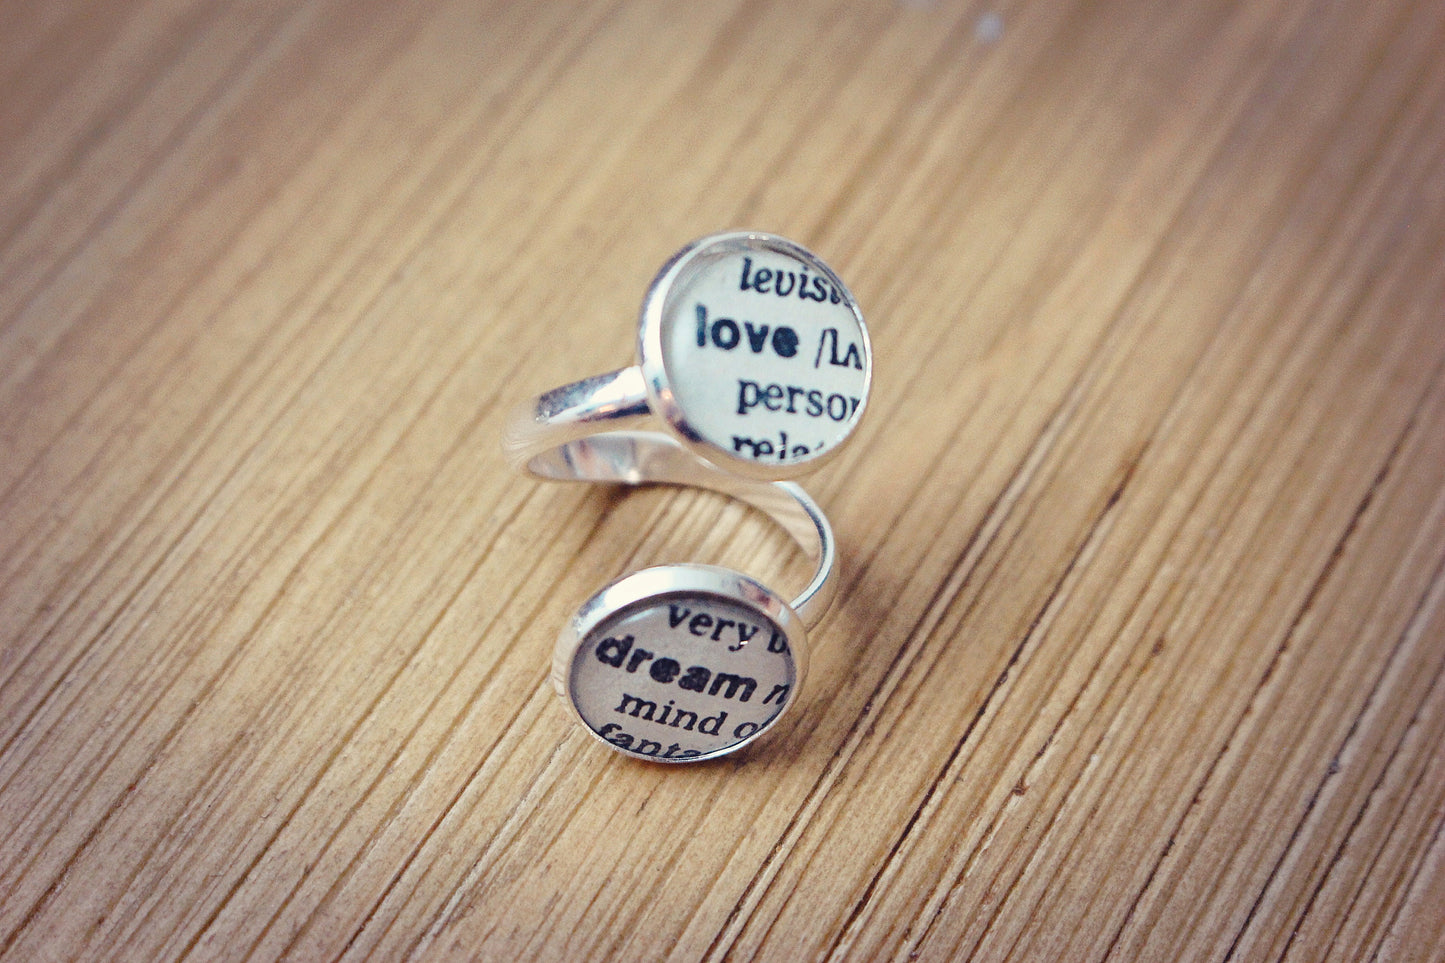 Upcycled Dictionary Definition Rings Reclaimed dictionary Your Choice of Words. Family Home Love Life Always Forever Dream Mum Hero Friend